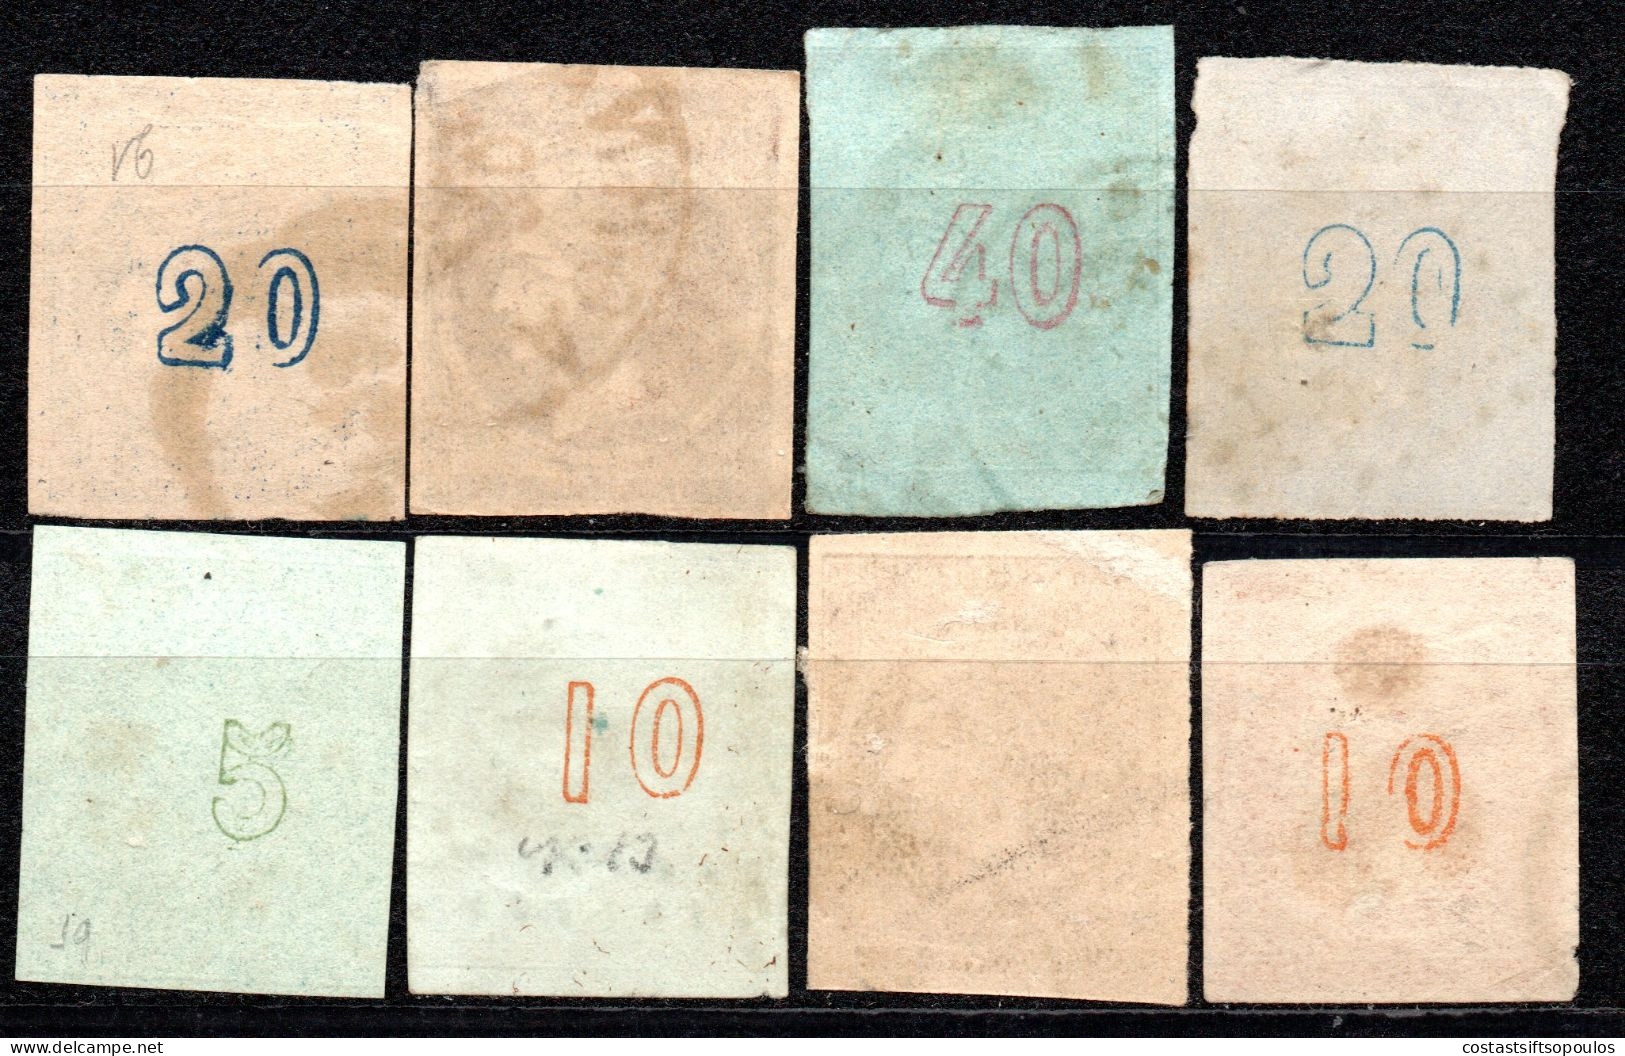 2471. GREECE  LARGE HERMES HEAD 8 NICE STAMPS LOT - Used Stamps